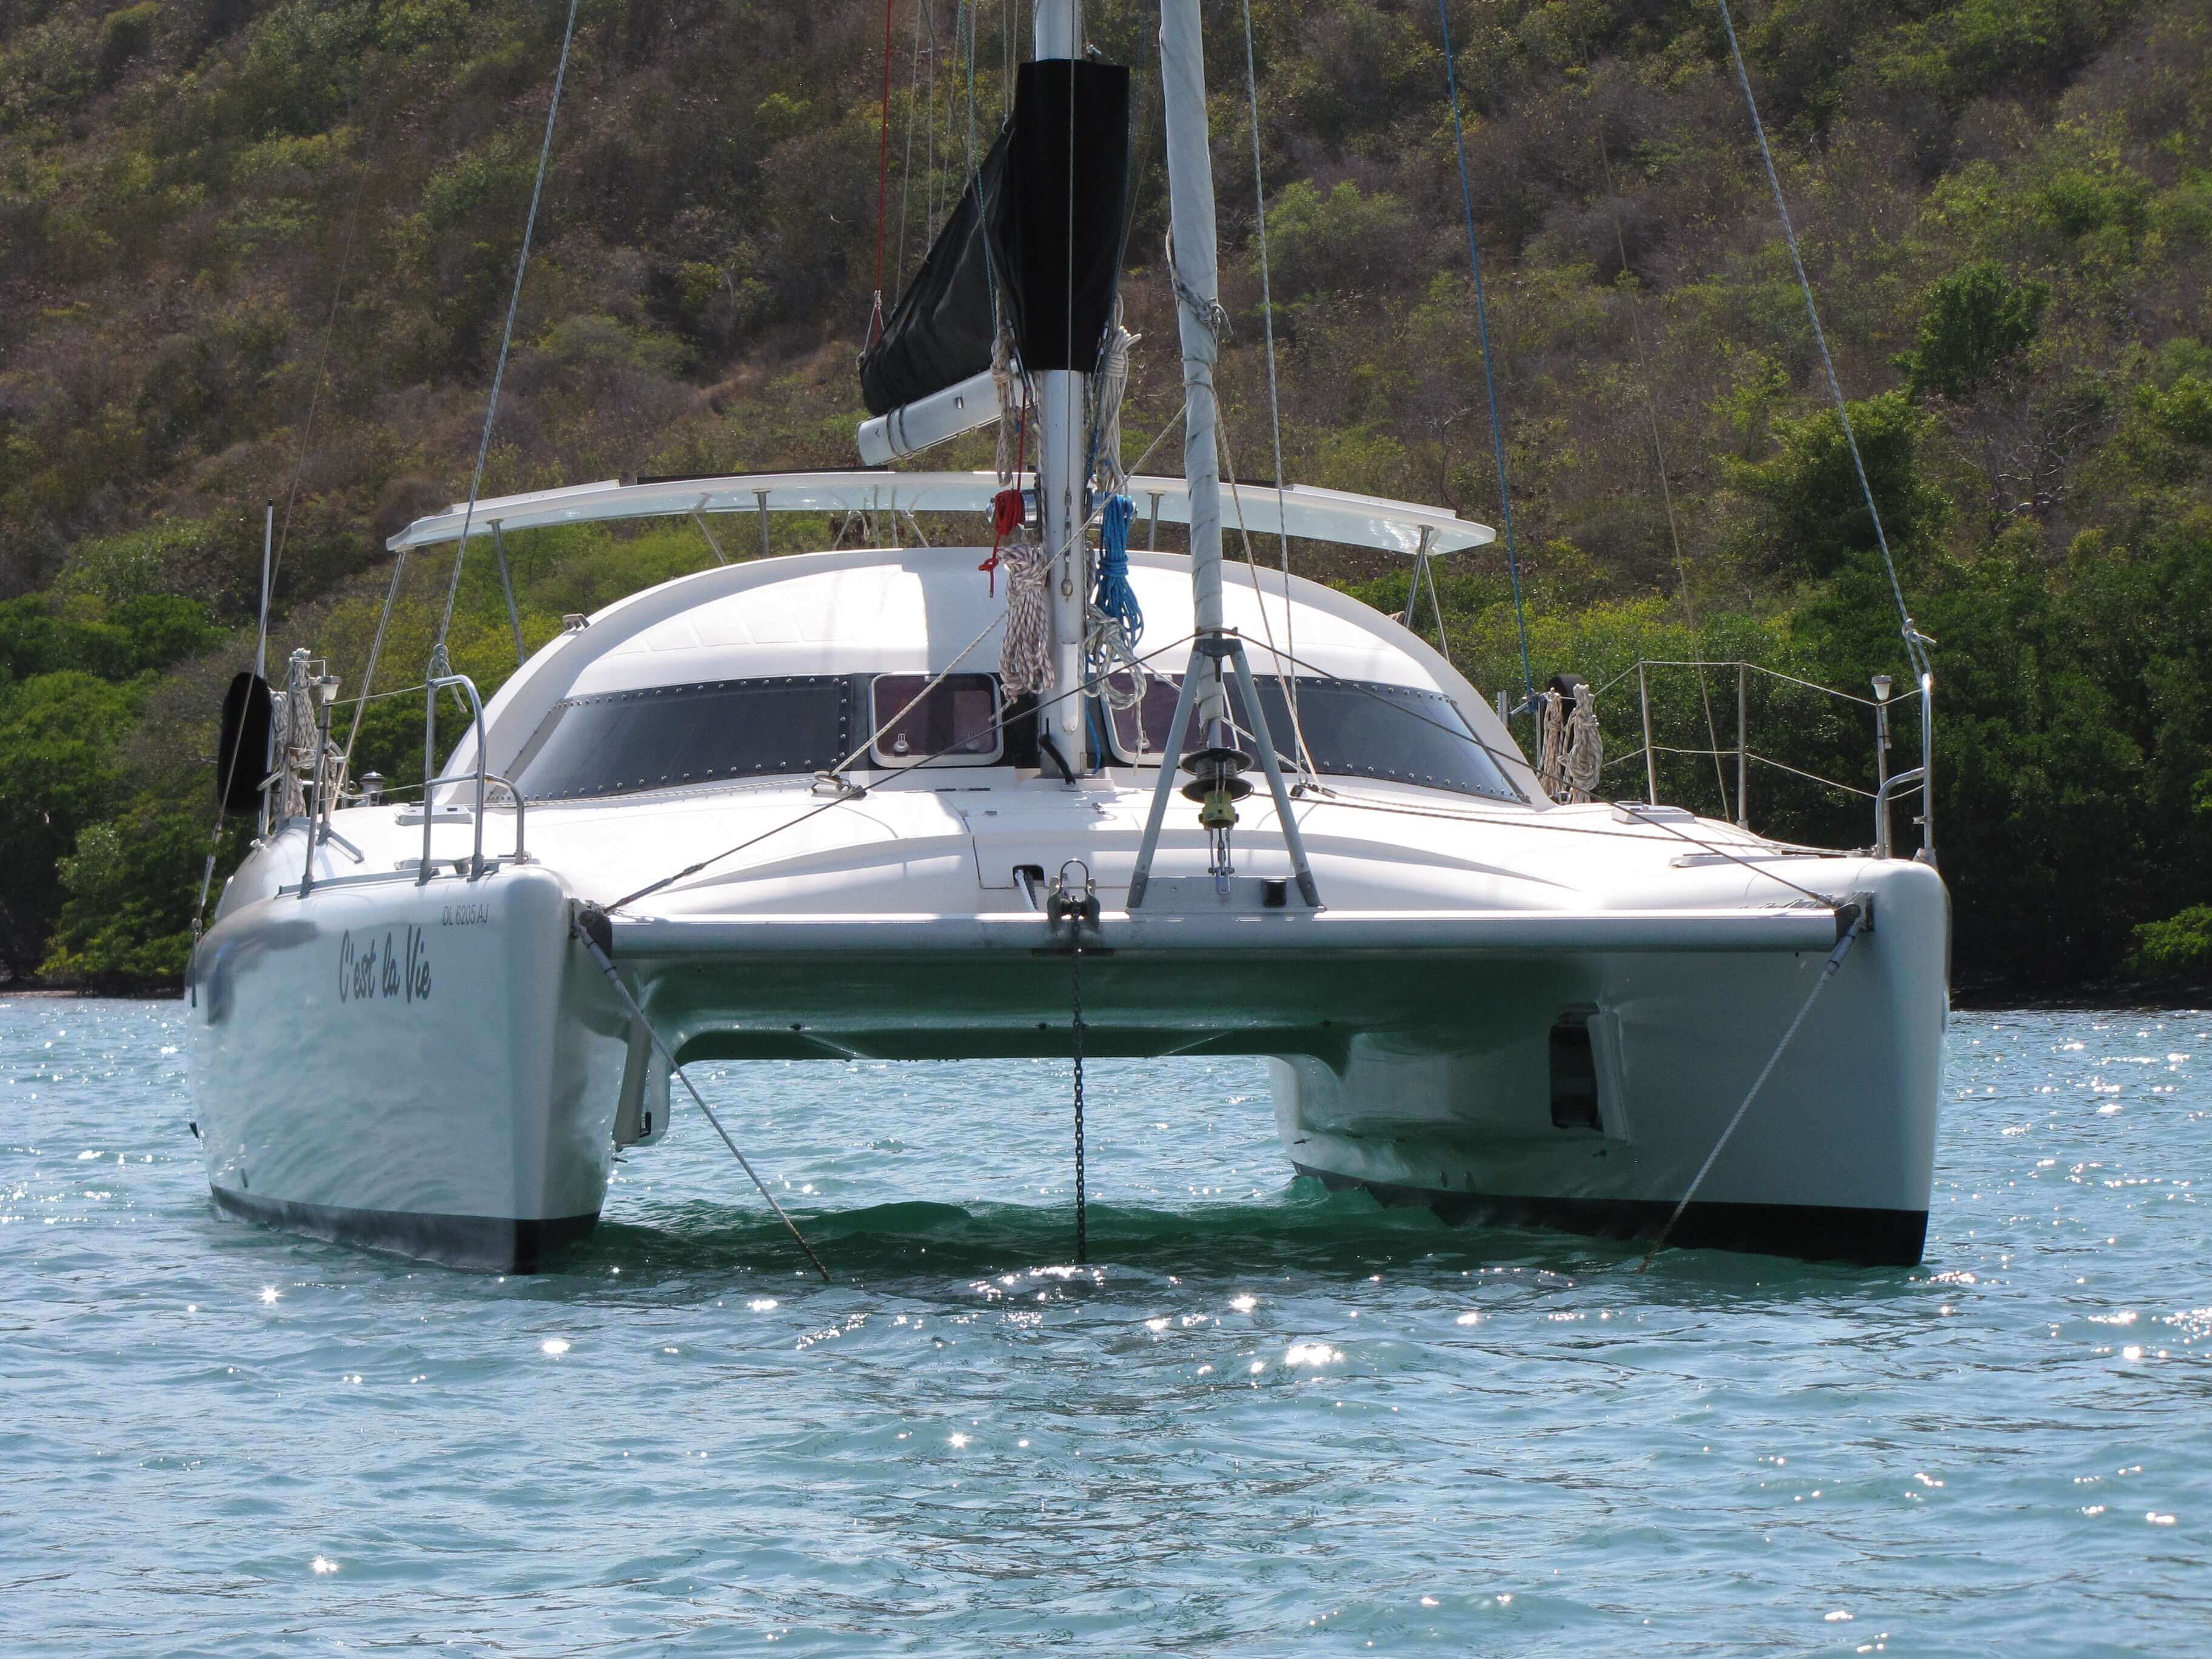 5 Price Cuts and 2 New Listings this week on Catamarans.com